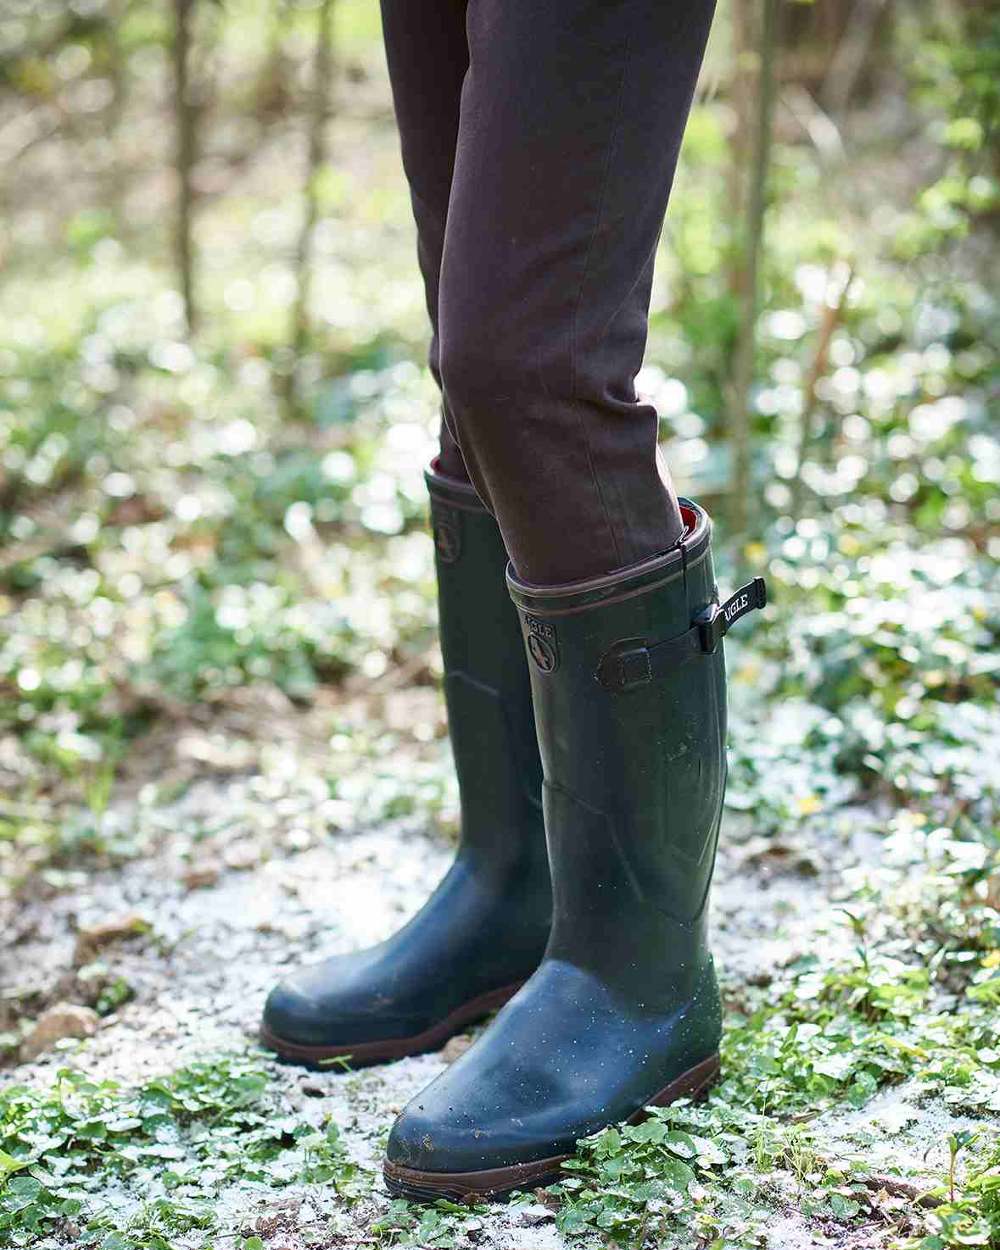 Aigle Parcours 2 ISO Wellington Boots in Bronze 